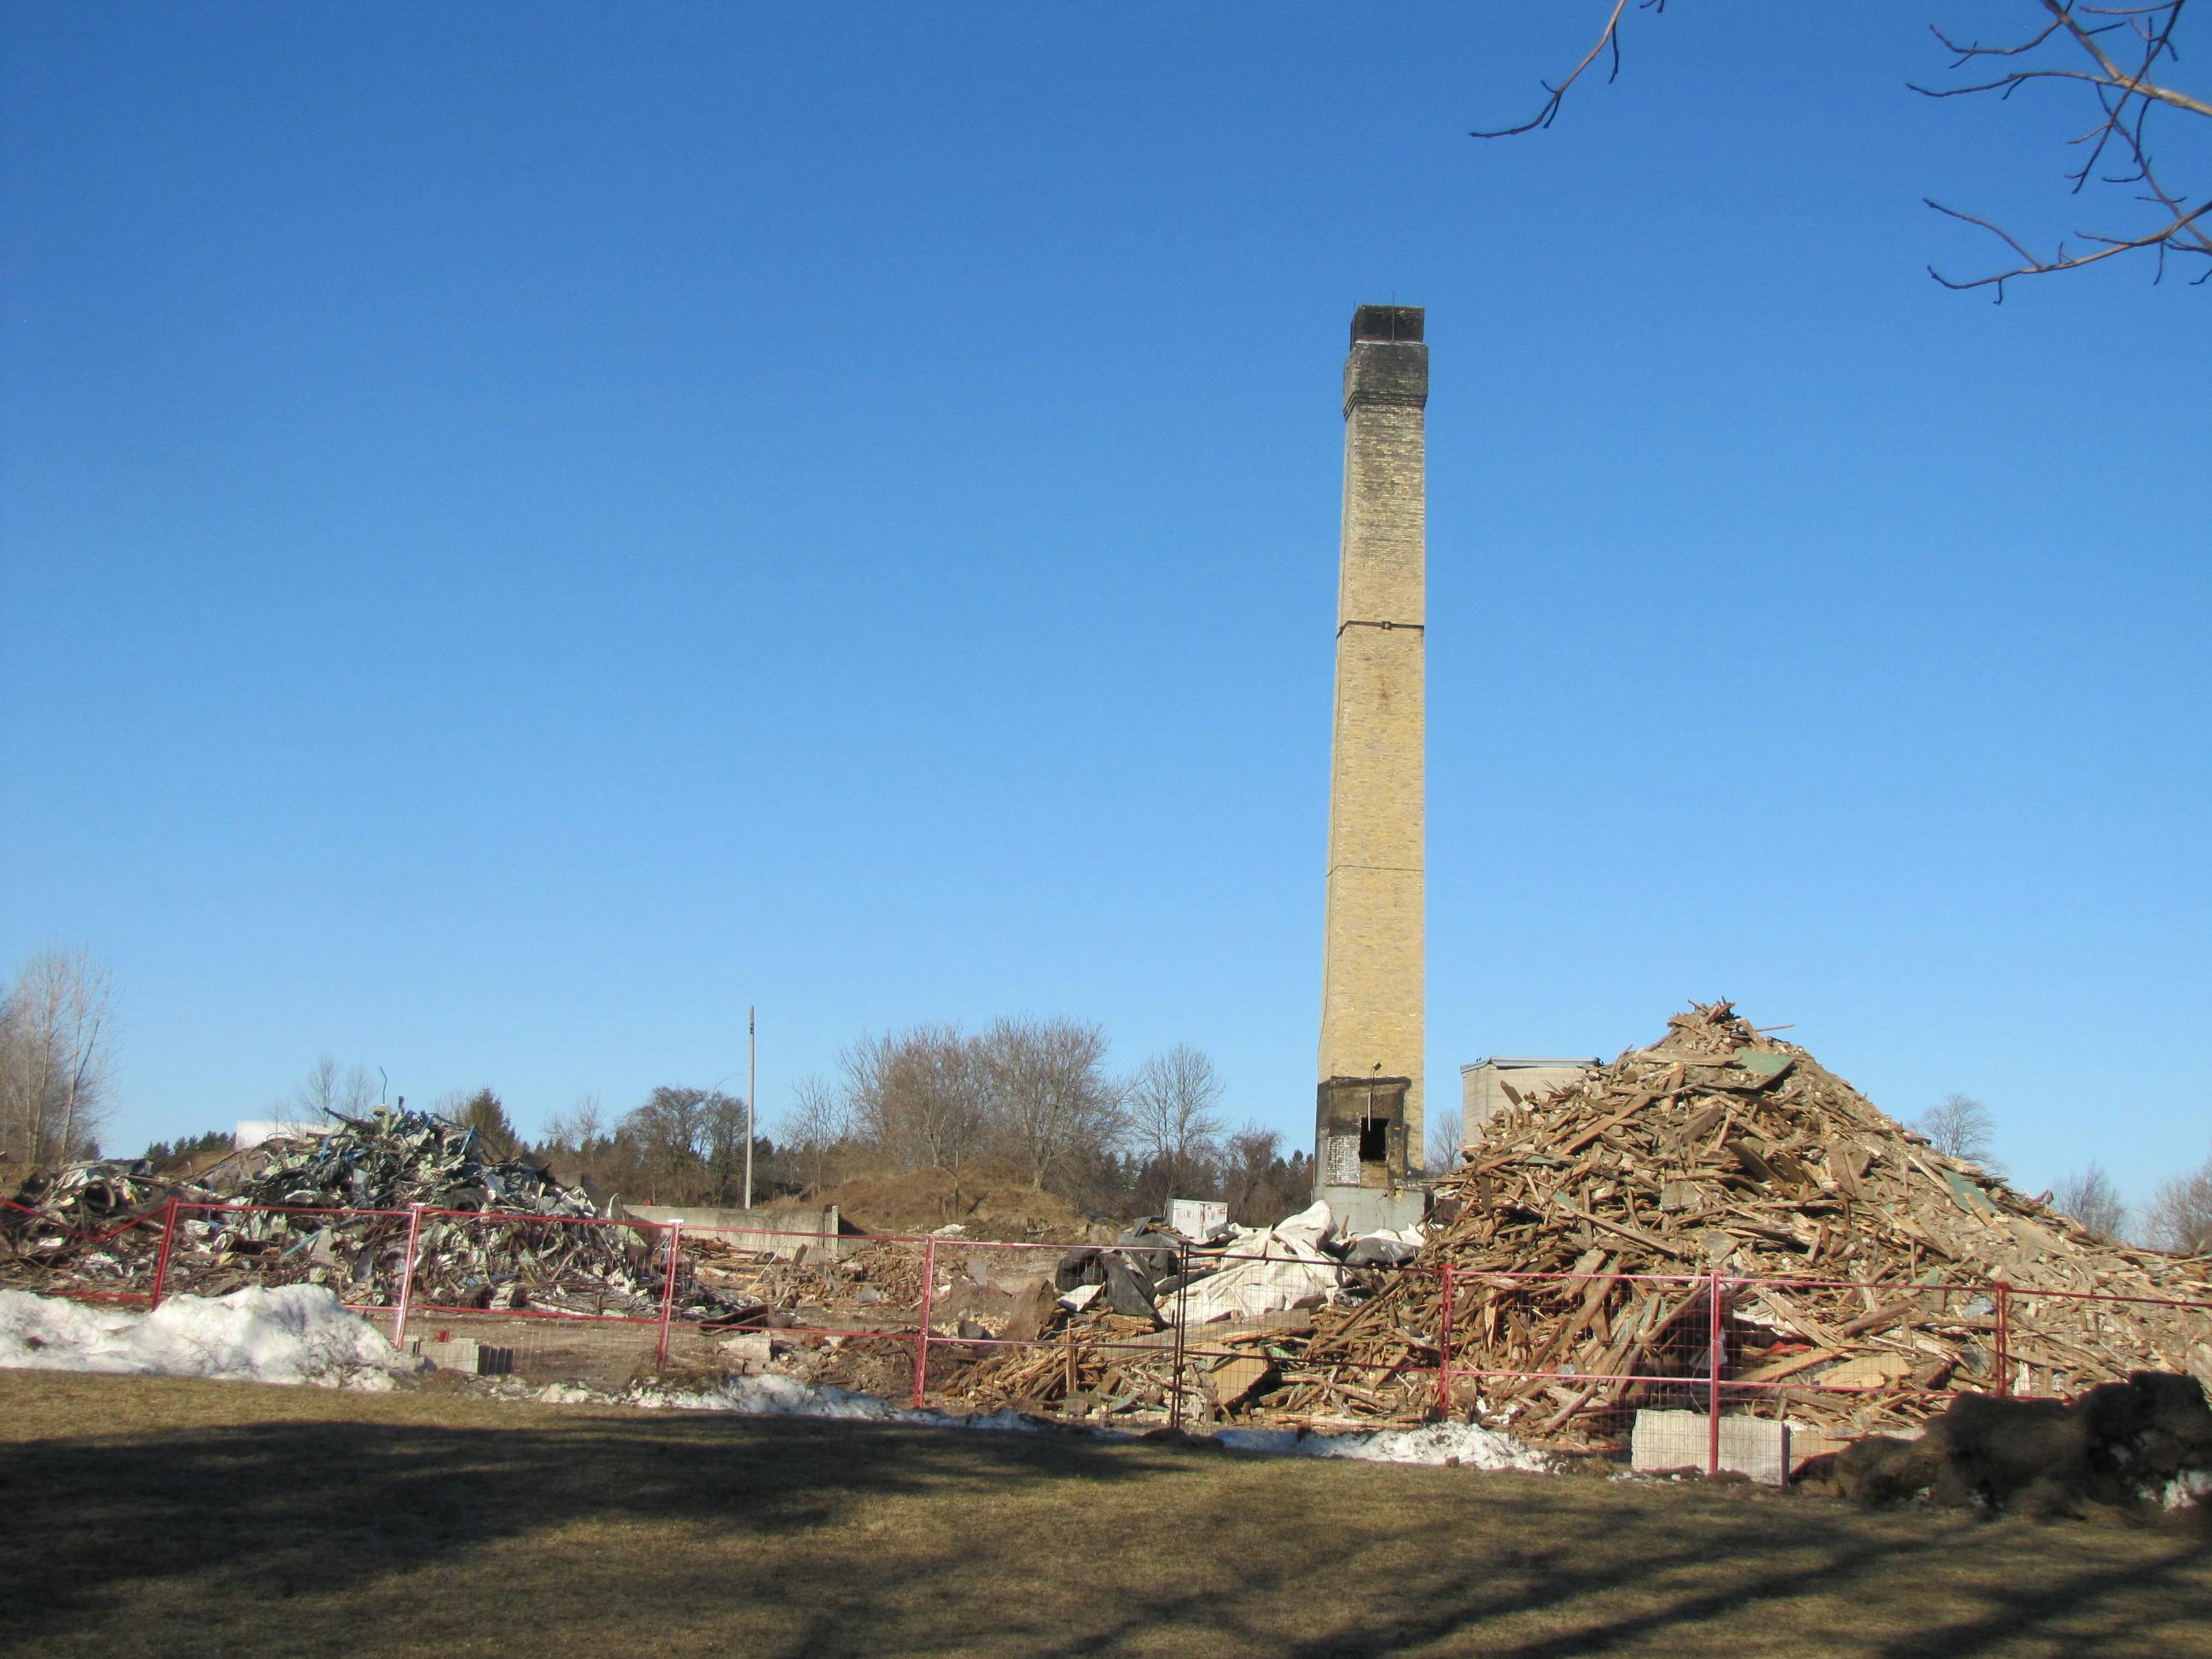 Demolition of Bogdon and Gross - March 19, 2021